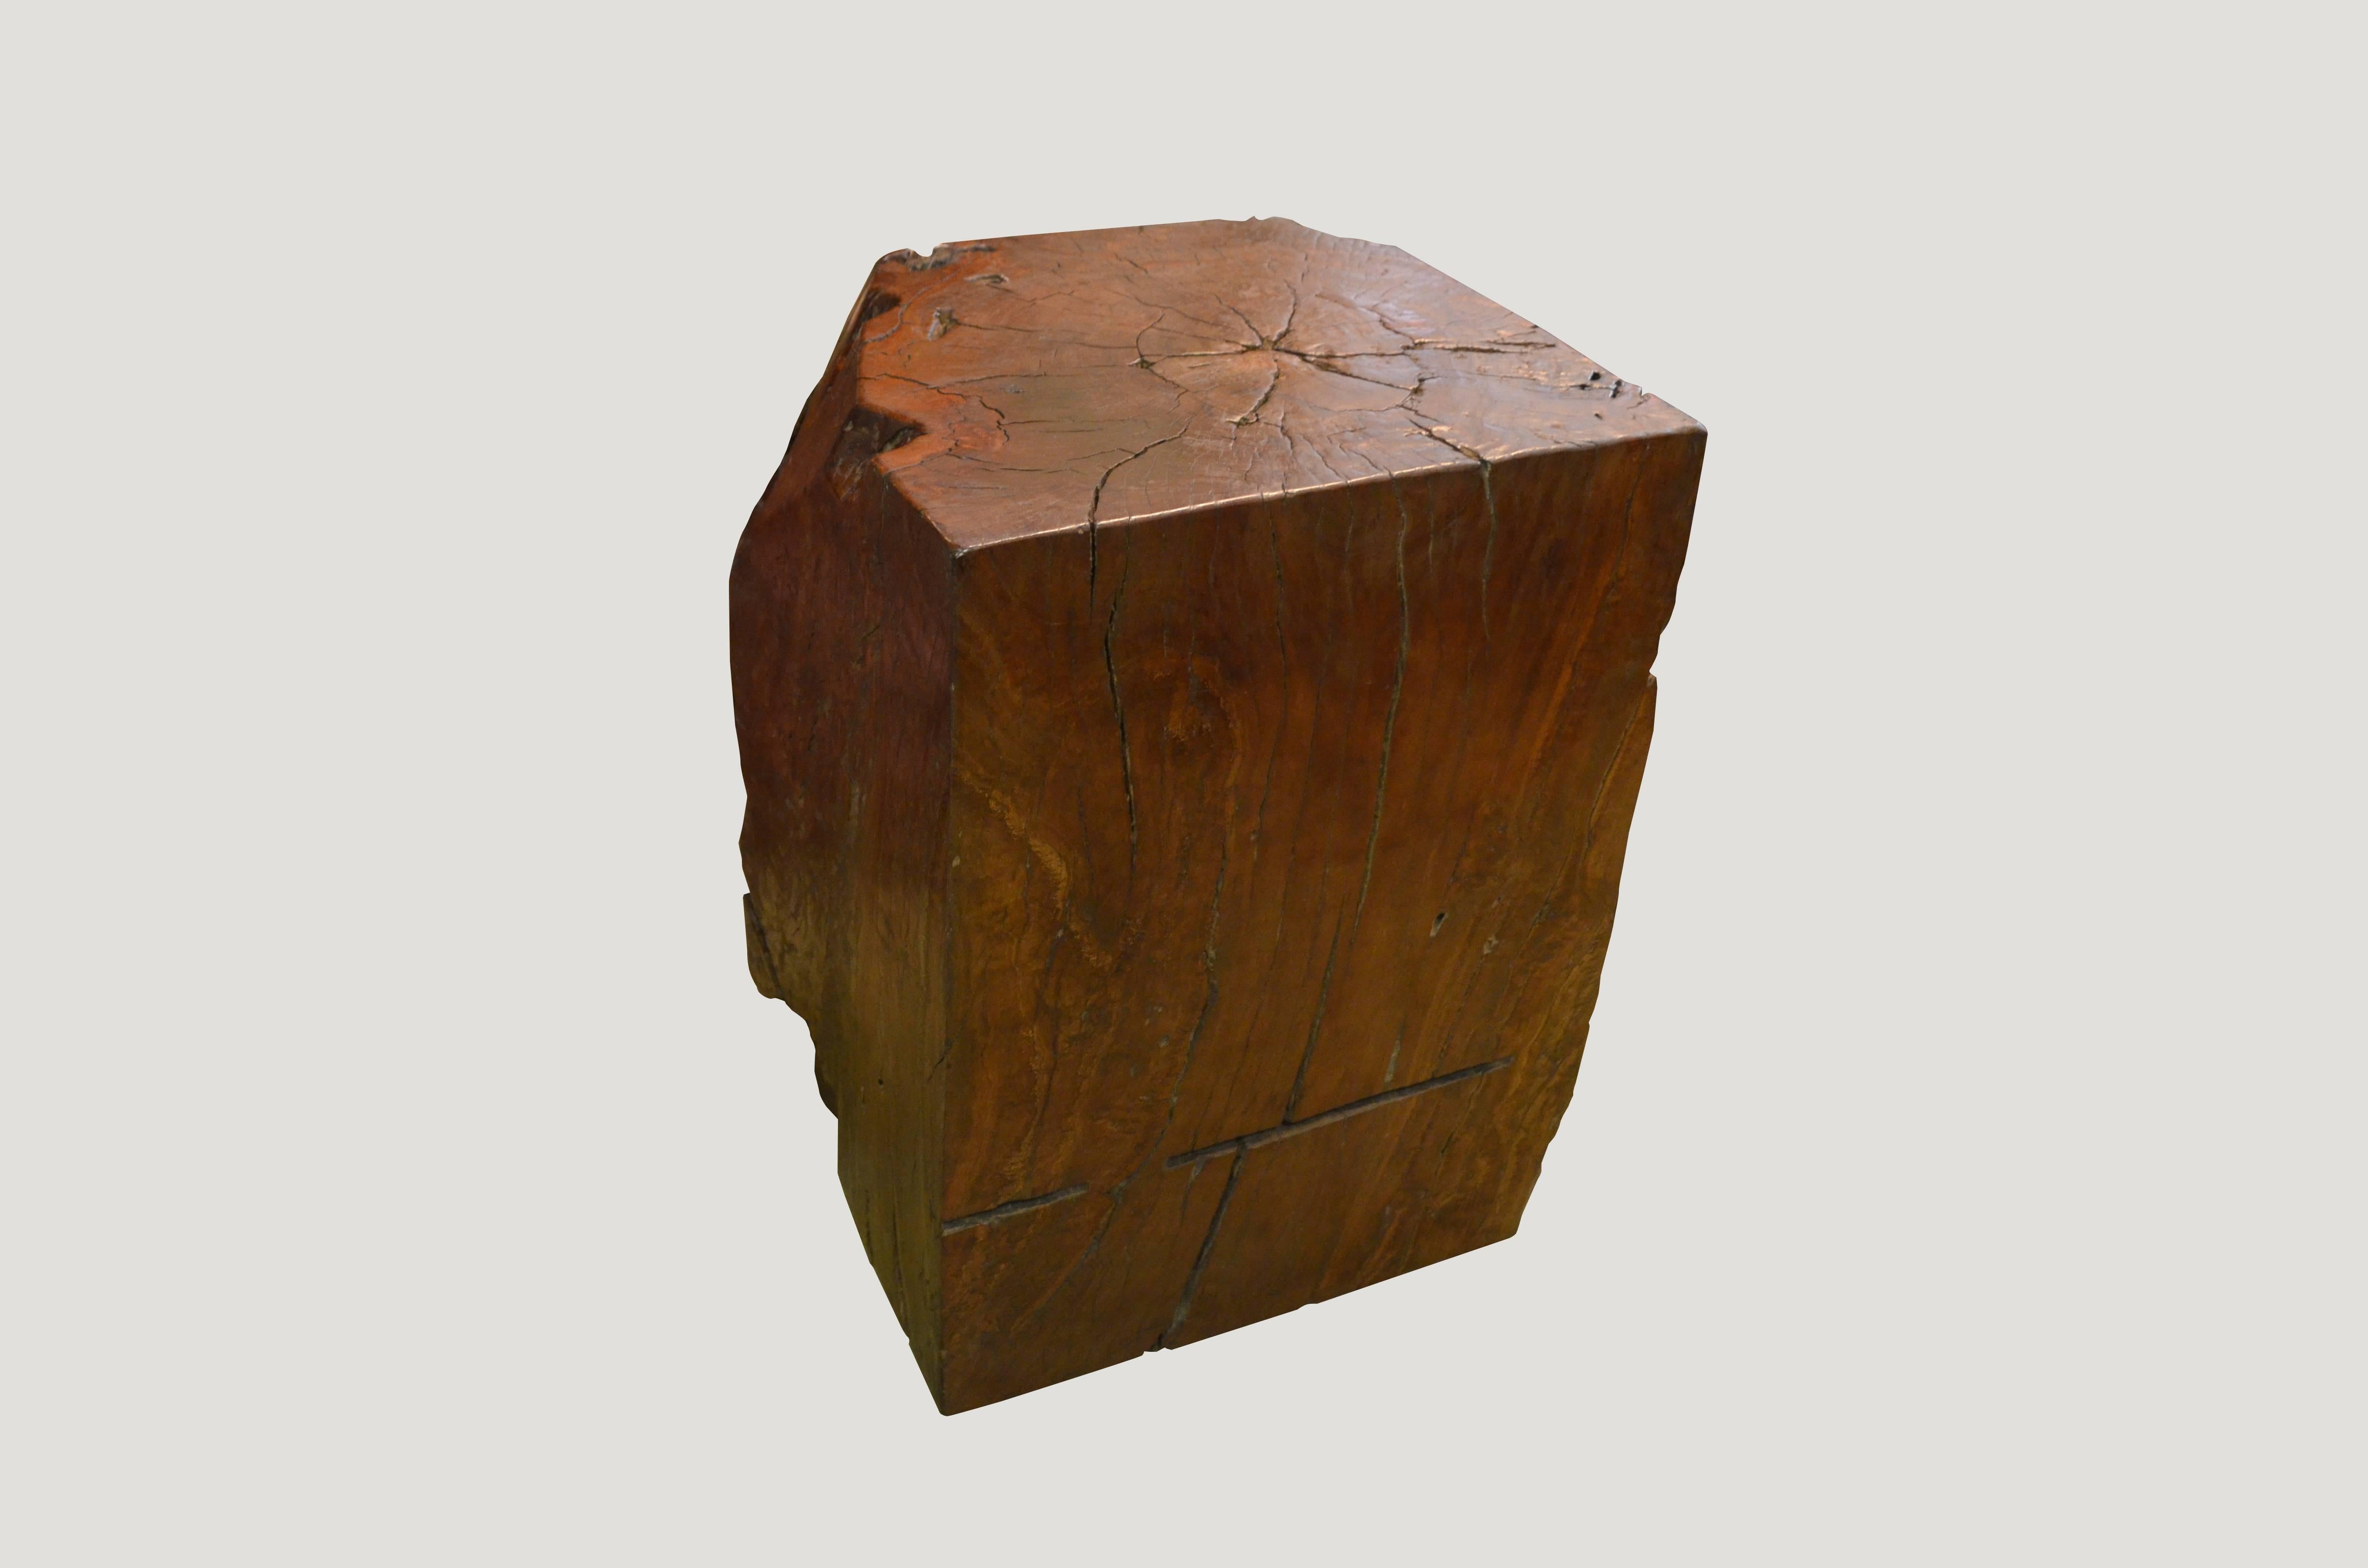 Single mahoni root wood side table or pedestal stained chestnut.

Andrianna Shamaris, Inc. The Leader In Modern Organic Design